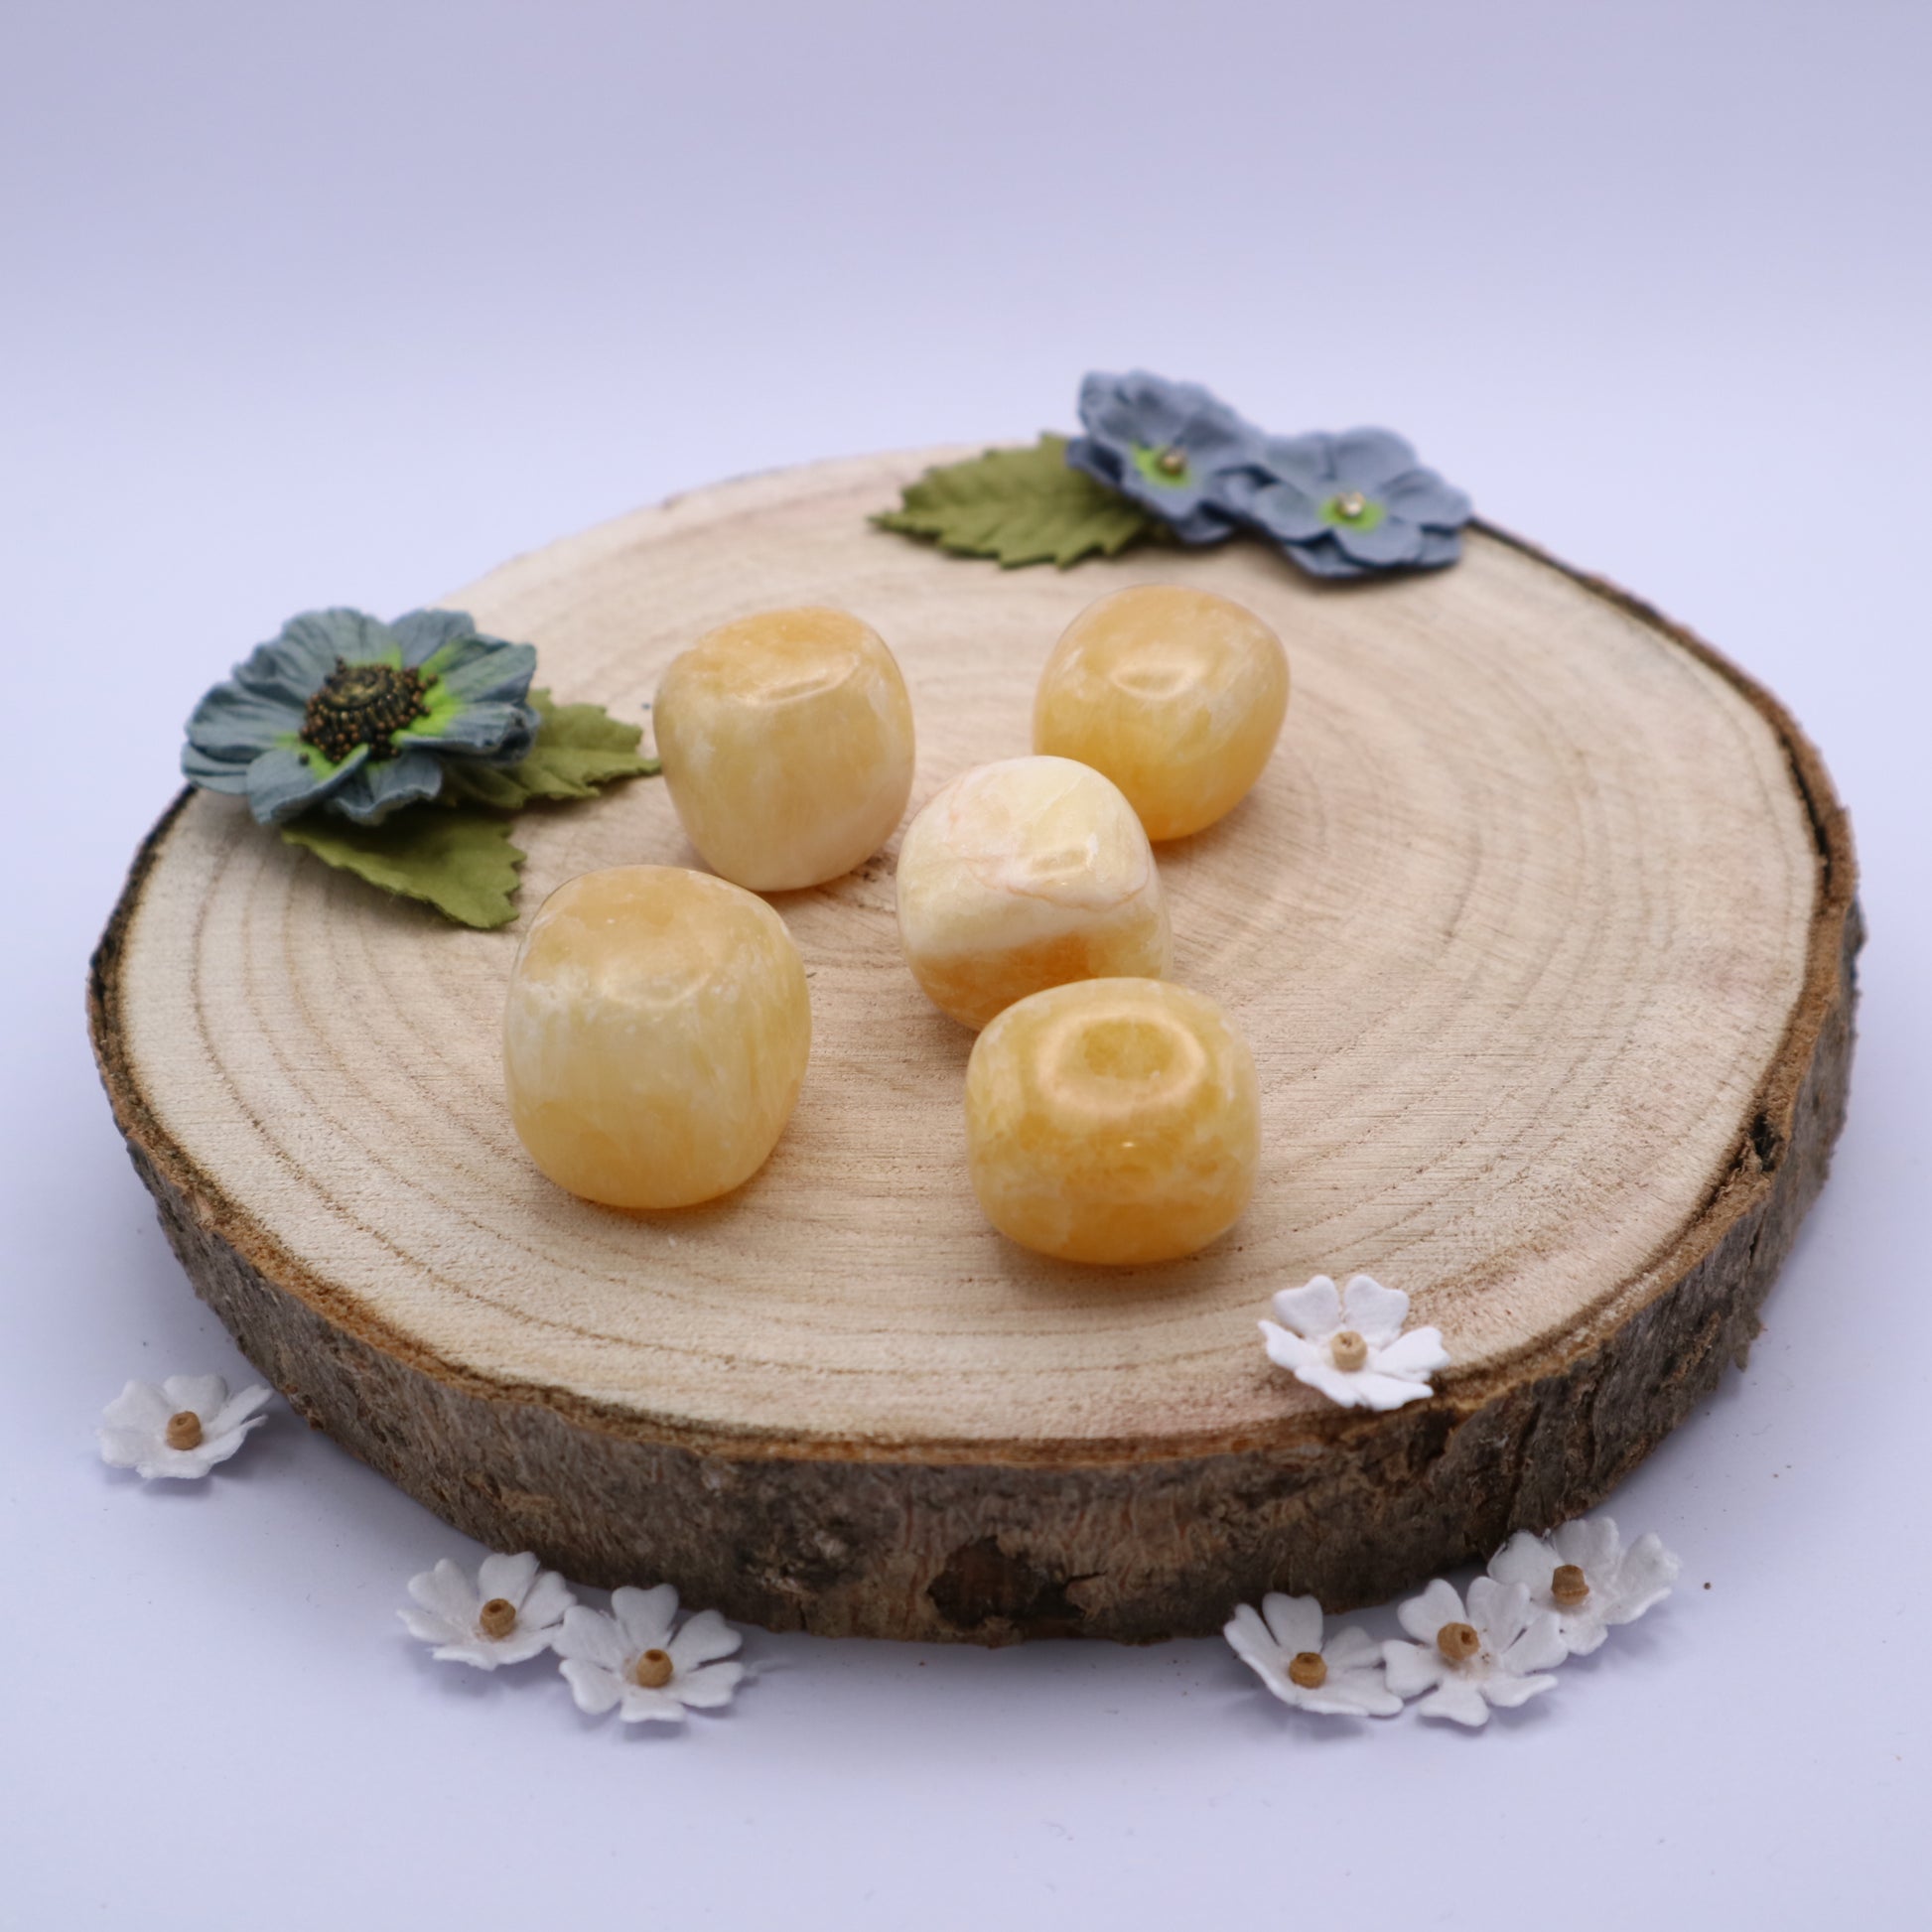 Five pieces of Orange Calcite crystals displayed on a piece of wood surrounded by flowers